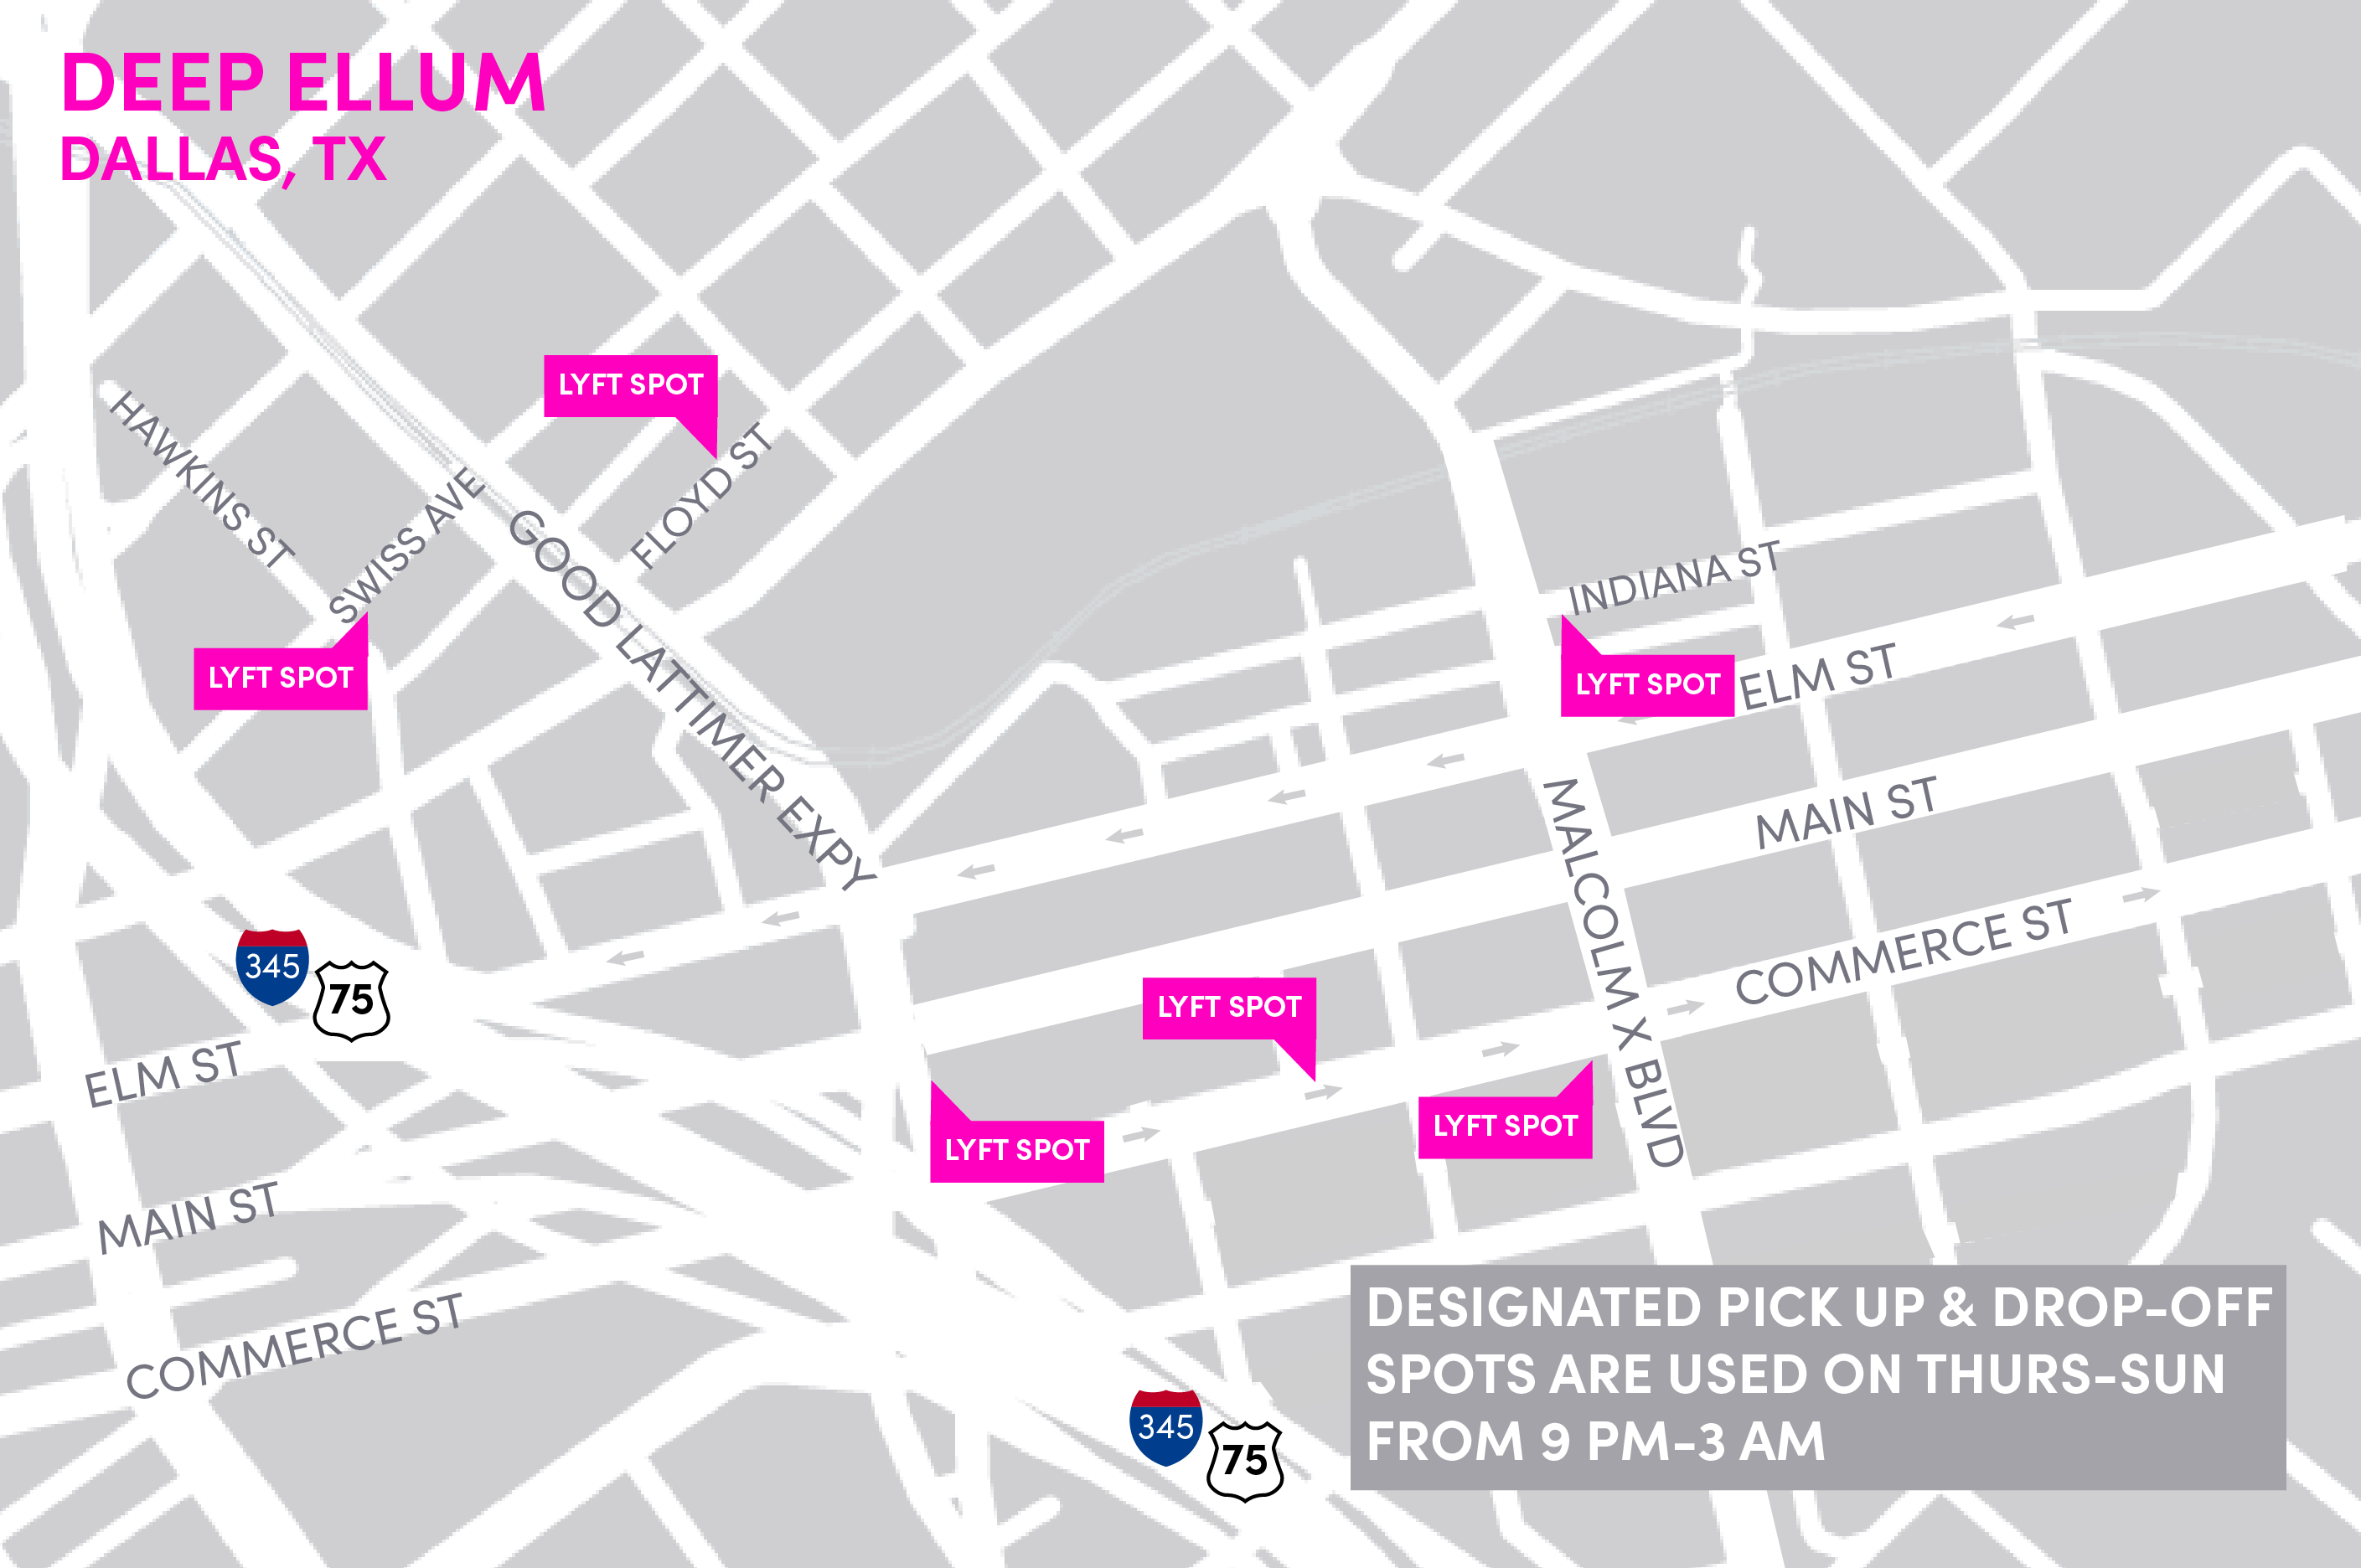 Shows drivers pickup and drop-off locations in the entertainment district of Deep Ellum in Dallas-Forth Worth